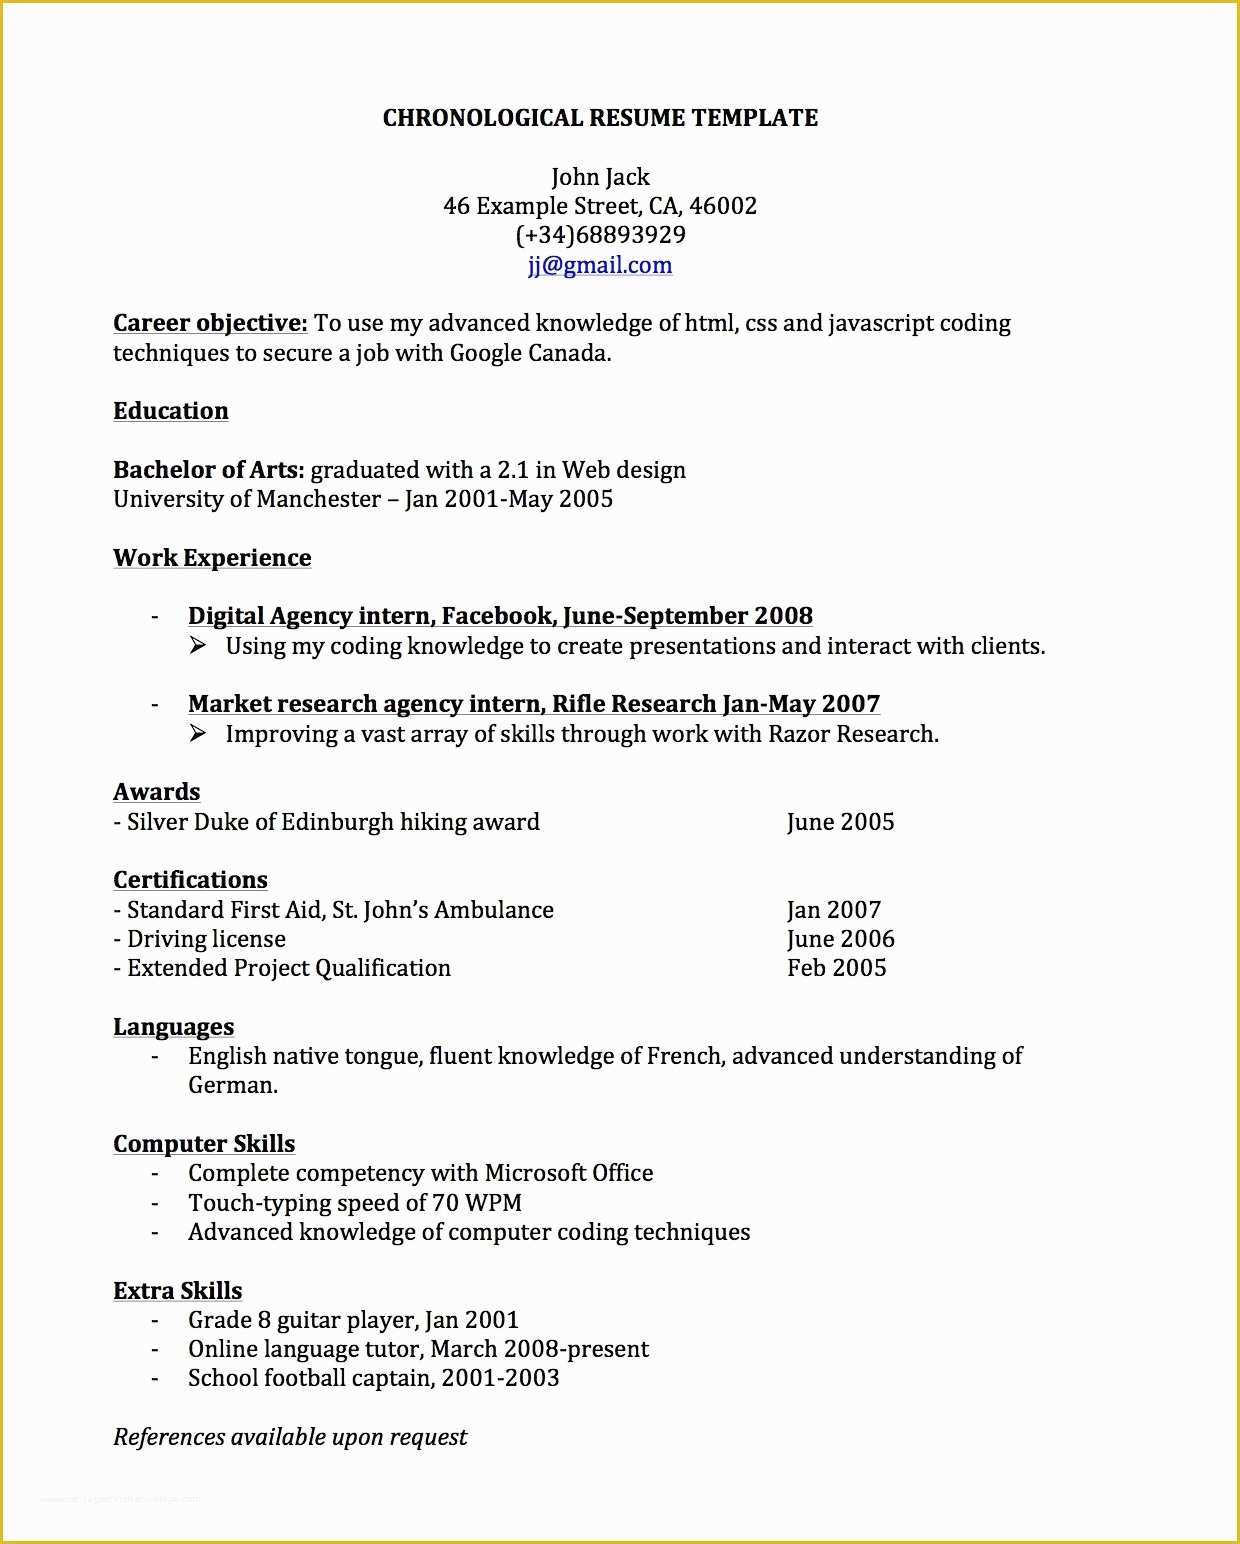 How to Write A Resume Template Free Of Chronological Resume for Canada